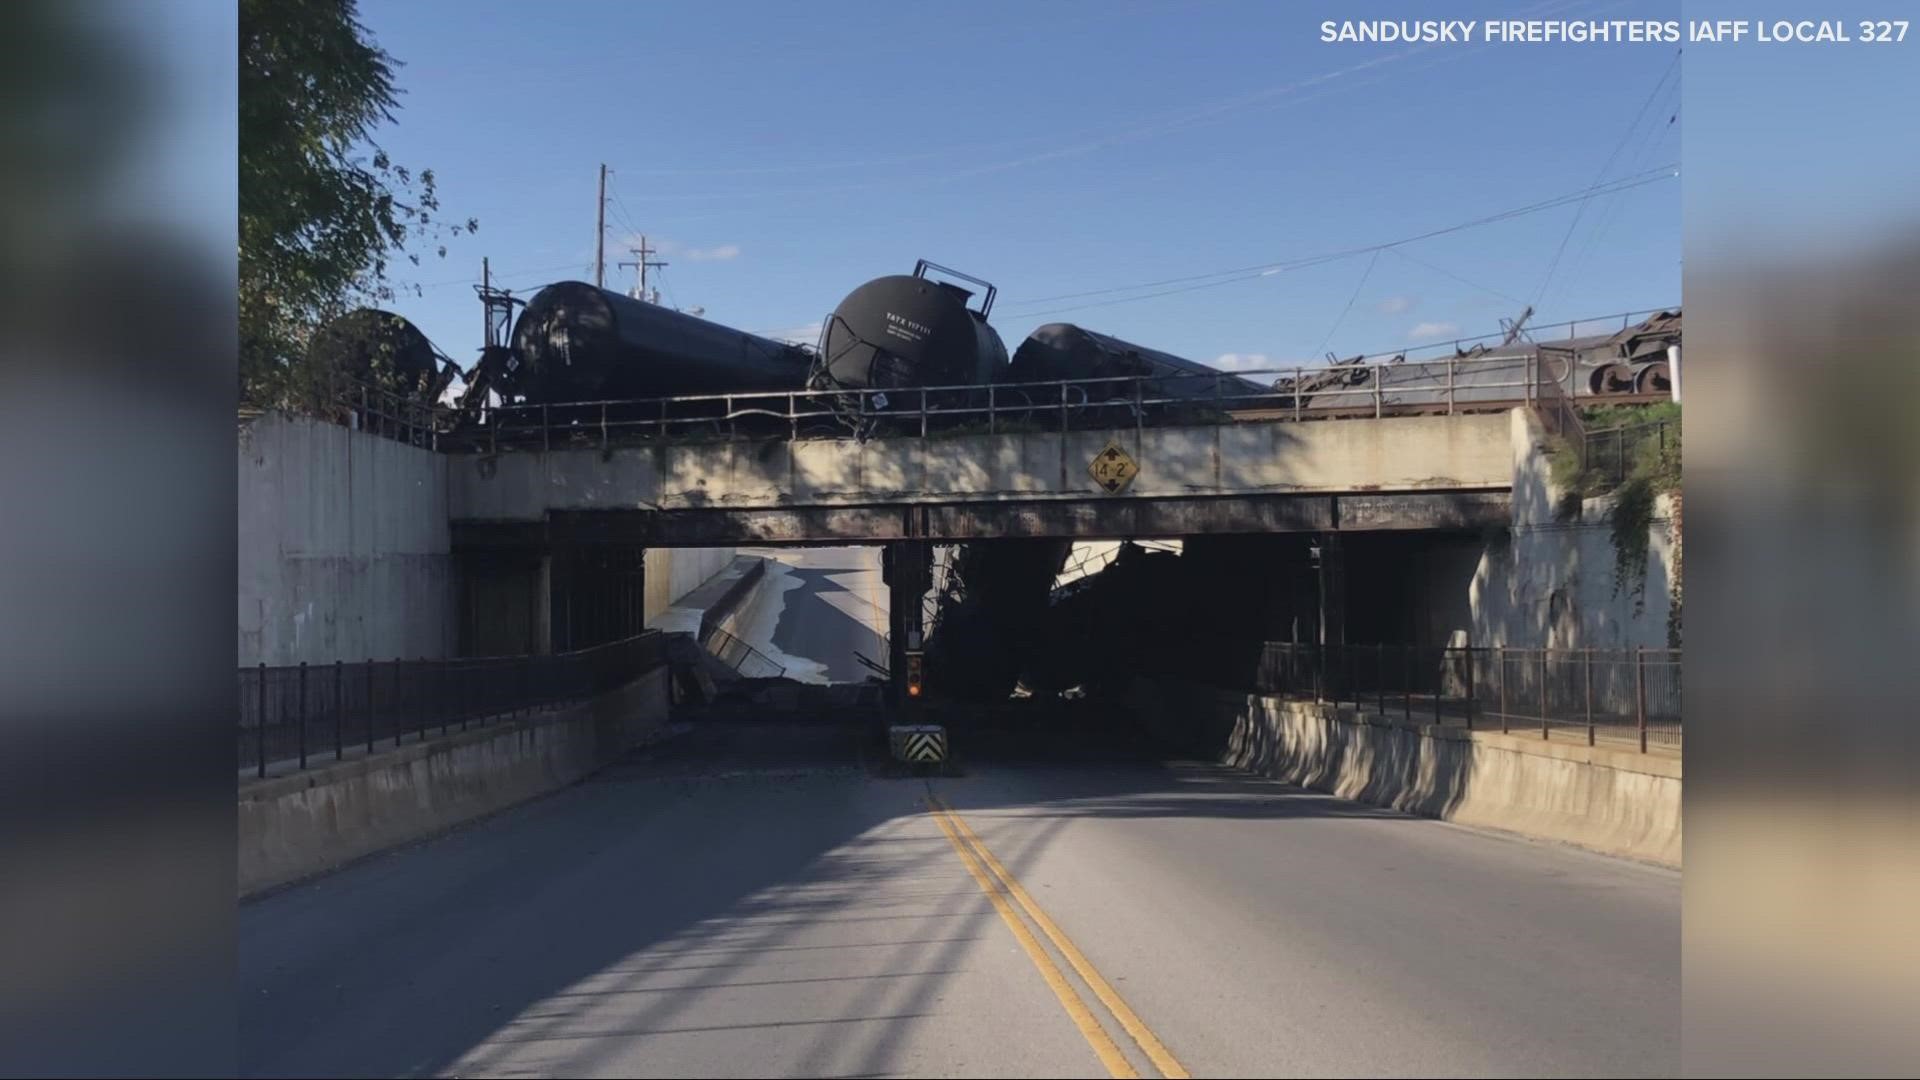 A train derailment in Sandusky on Saturday afternoon closed a main road in the city and knocked out power for those in the area.